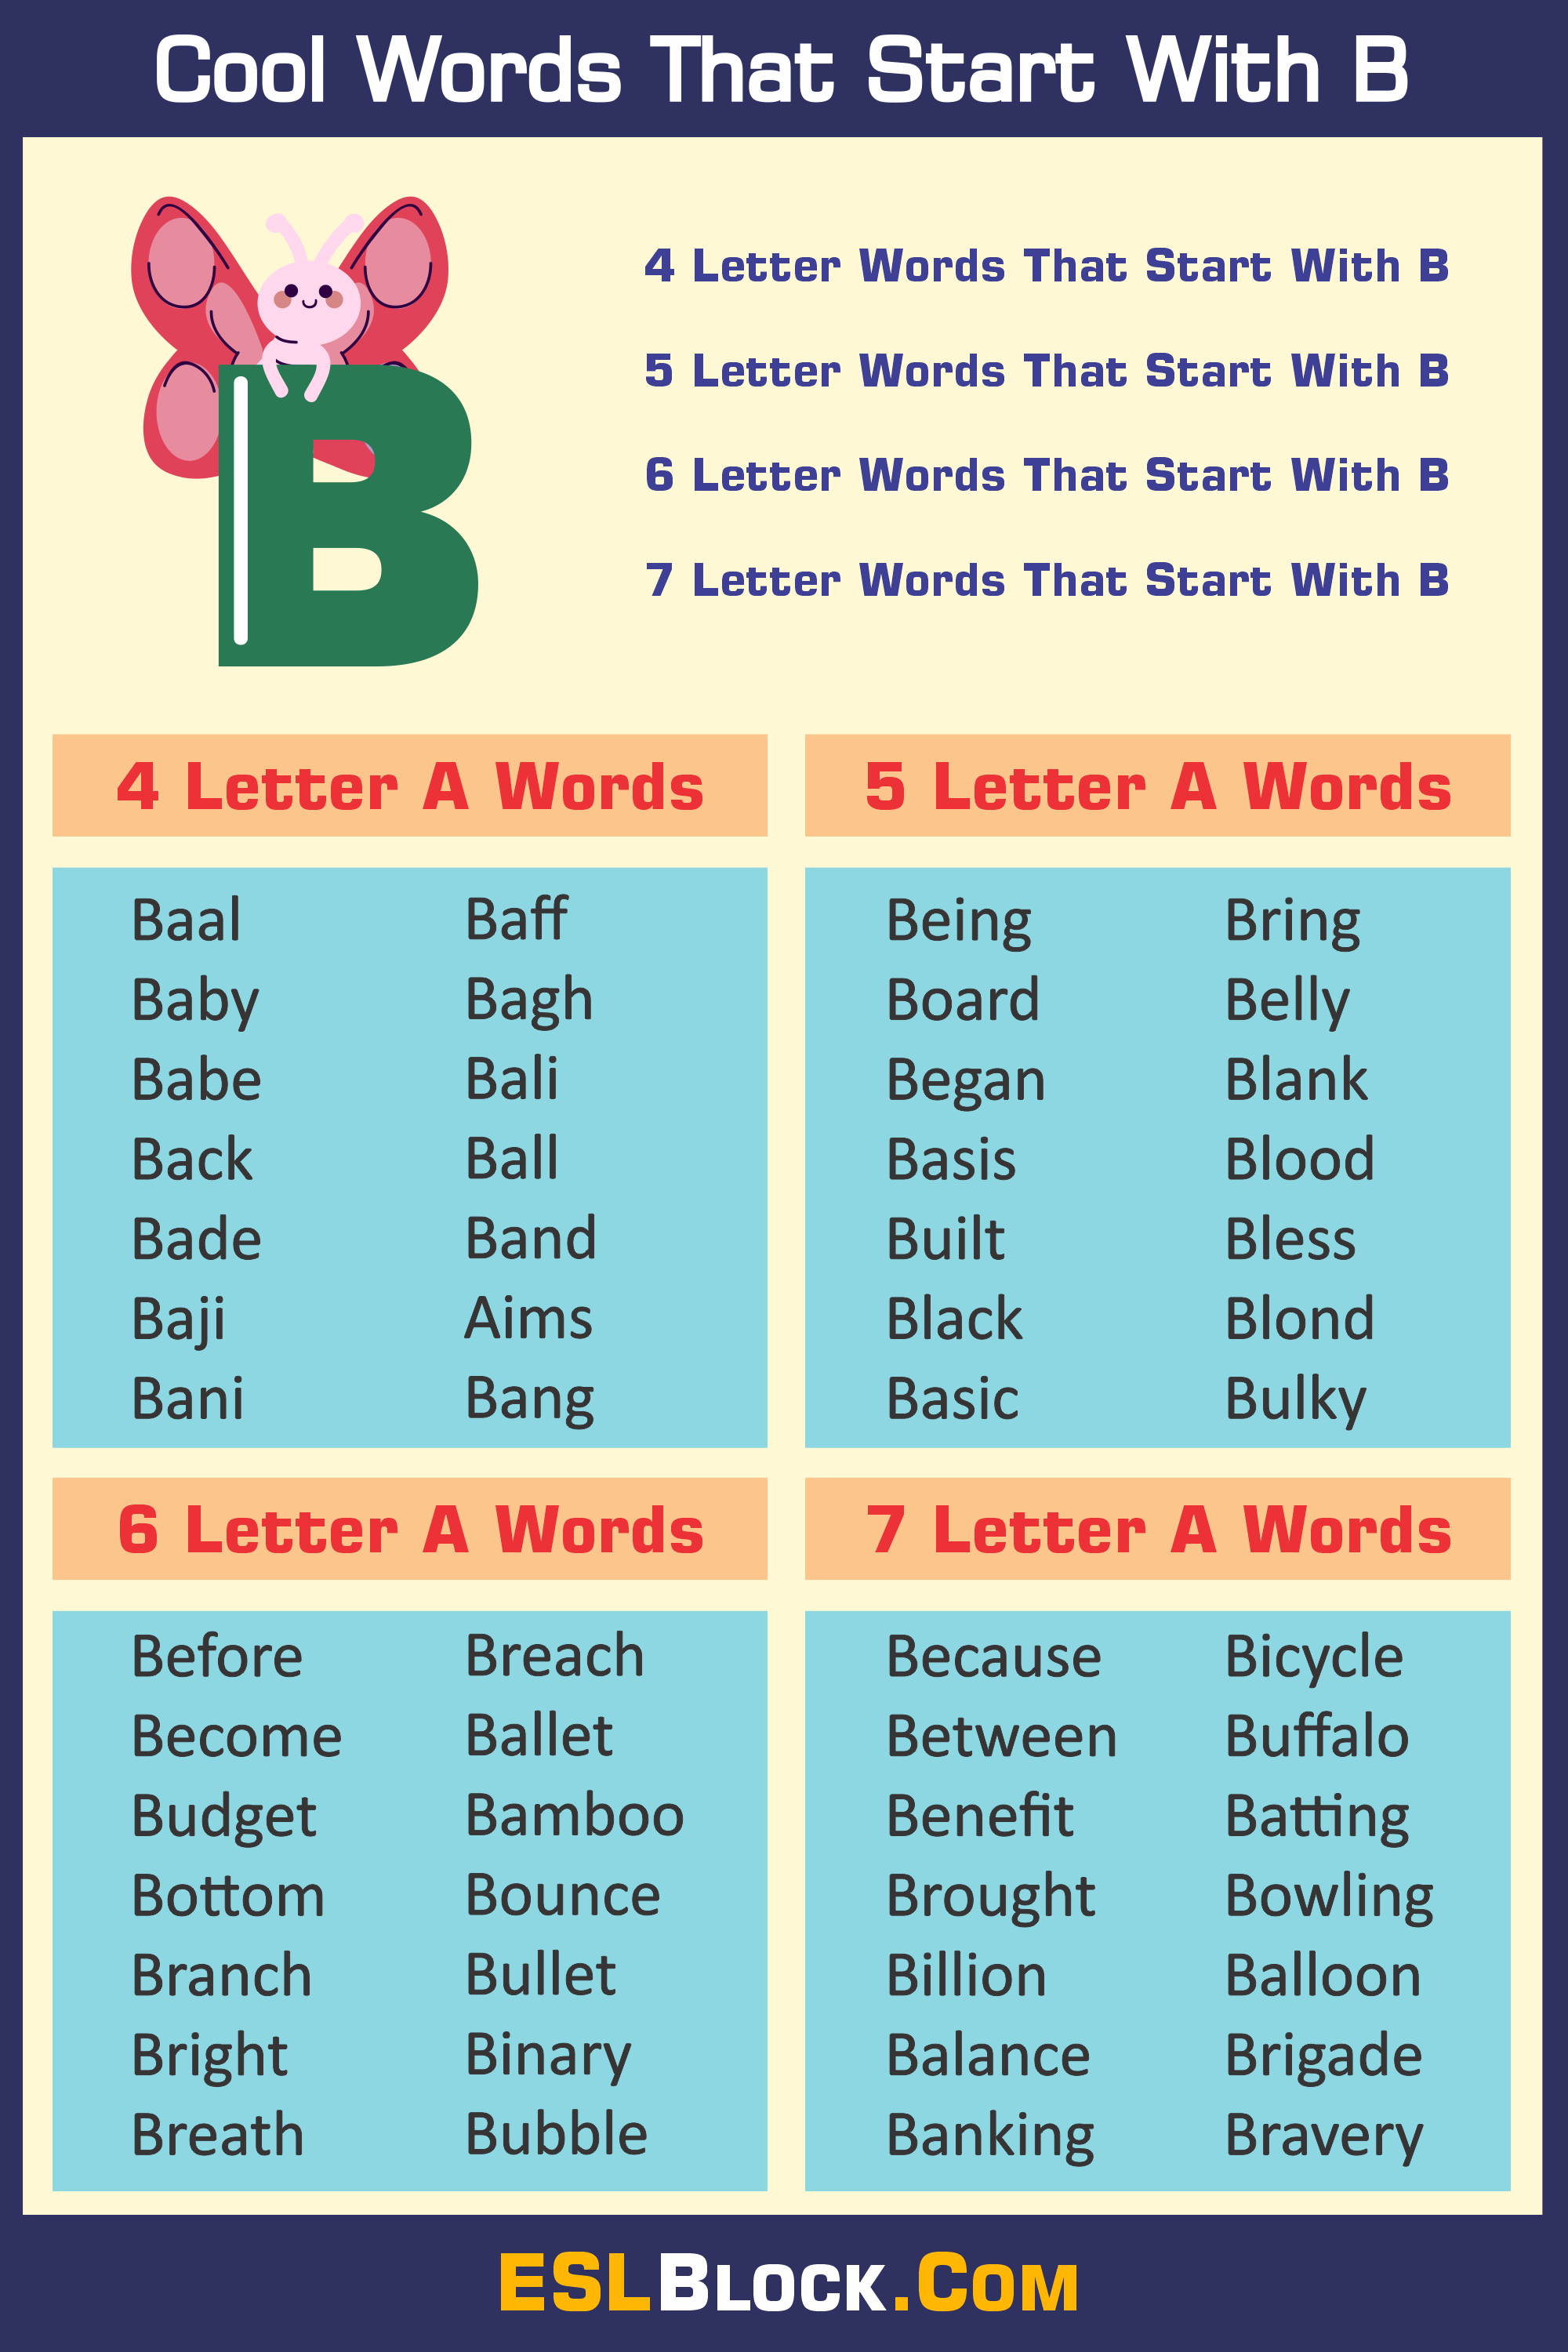 4 Letter Words, 4 Letter Words That Start With B, 5 Letter Words, 5 Letter Words That Start With B, 6 Letter Words, 6 Letter Words That Start With B, 7 Letter Words, 7 Letter Words That Start With B, Awesome Cool Words, B Words, Christmas Words That Start With B, Cool Words, Describing Words That Start With B, Descriptive Words That Start With B, English Words, Five Letter Words Starting with B, Good Words That Start With B, Nice Words That Start With B, Positive Words That Start With B, Unique Words, Word Dictionary, Words That Start With B, Words That Start With B to Describe Someone